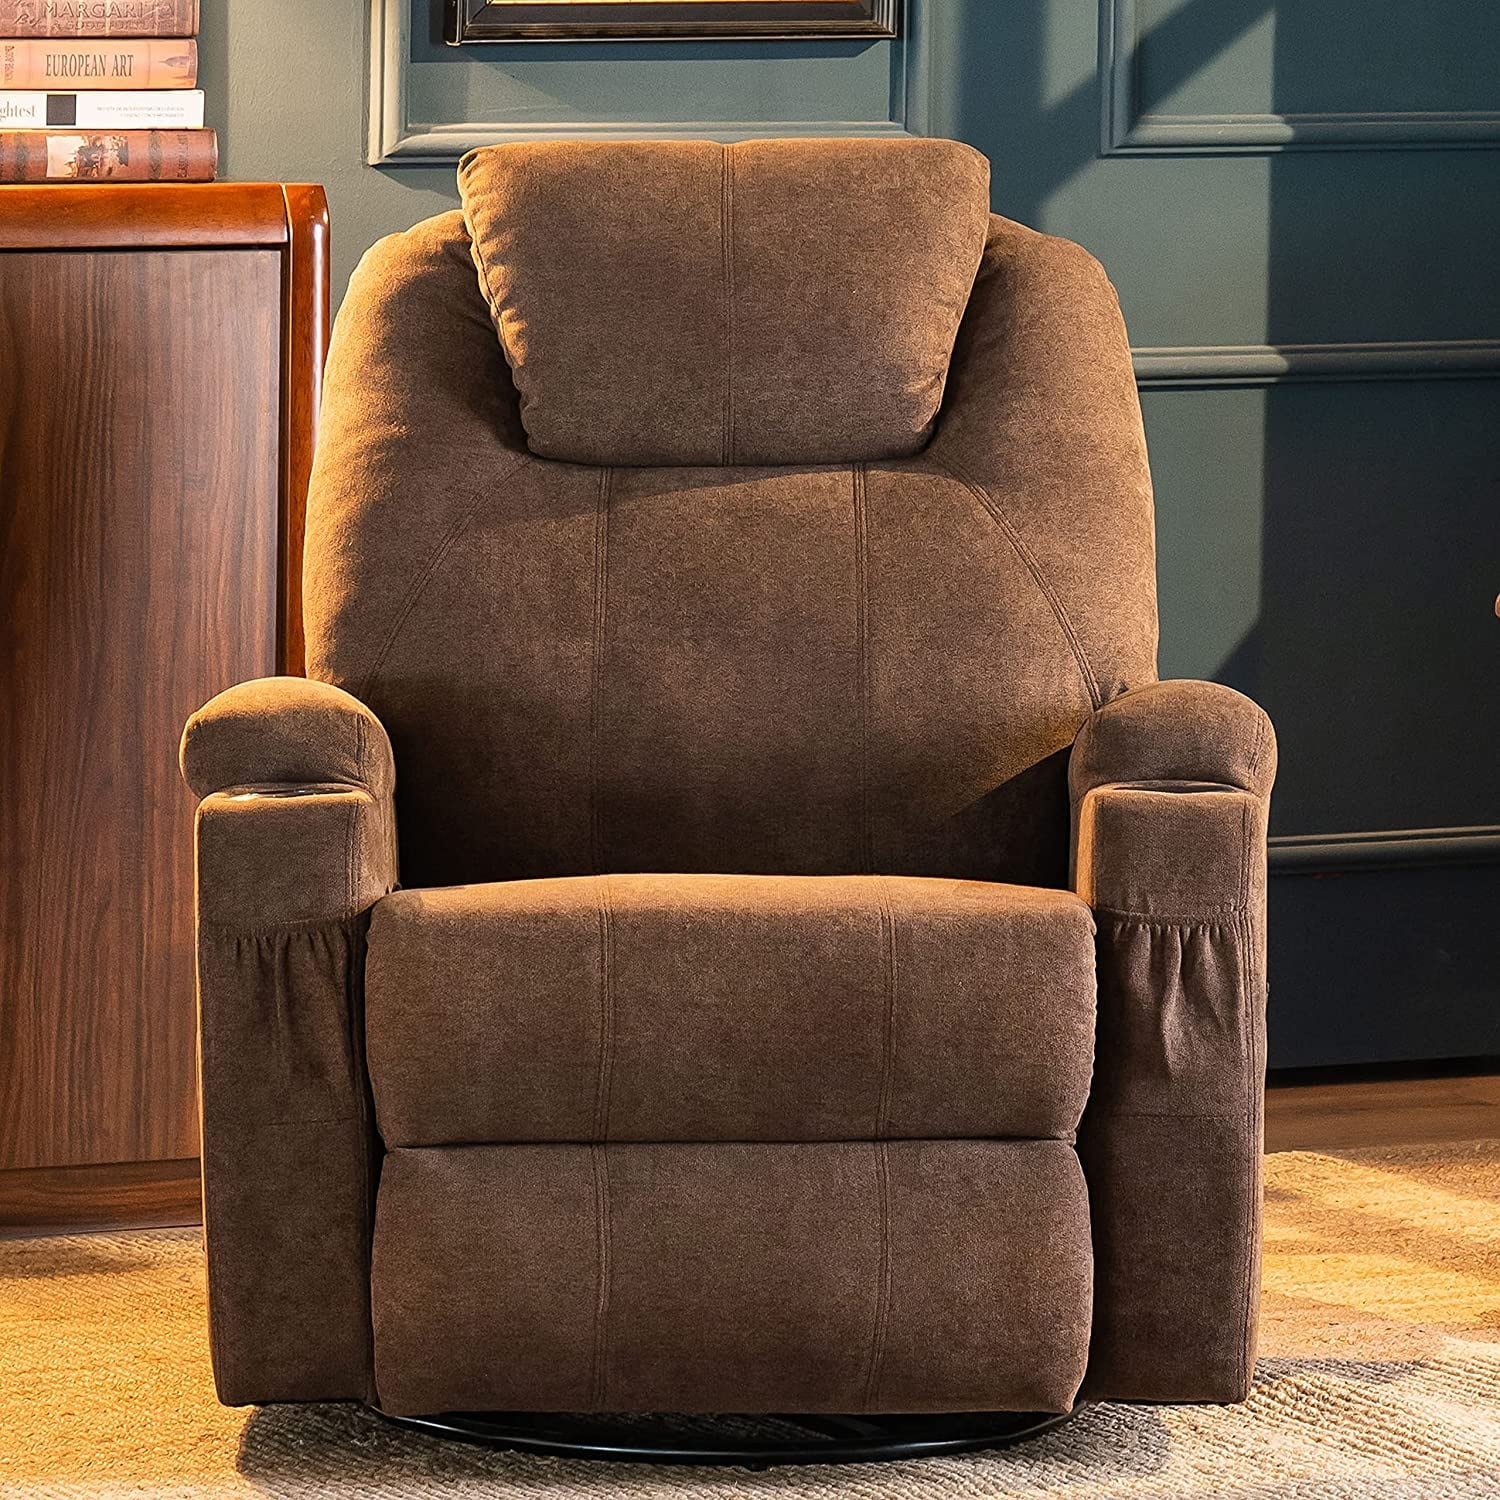 Mcombo Electric Power Swivel Glider Recliner Chair with Heat and Vibrating for Nursery, USB Ports, Pillow, Cup Holders, Remote Control, Fabric 7752